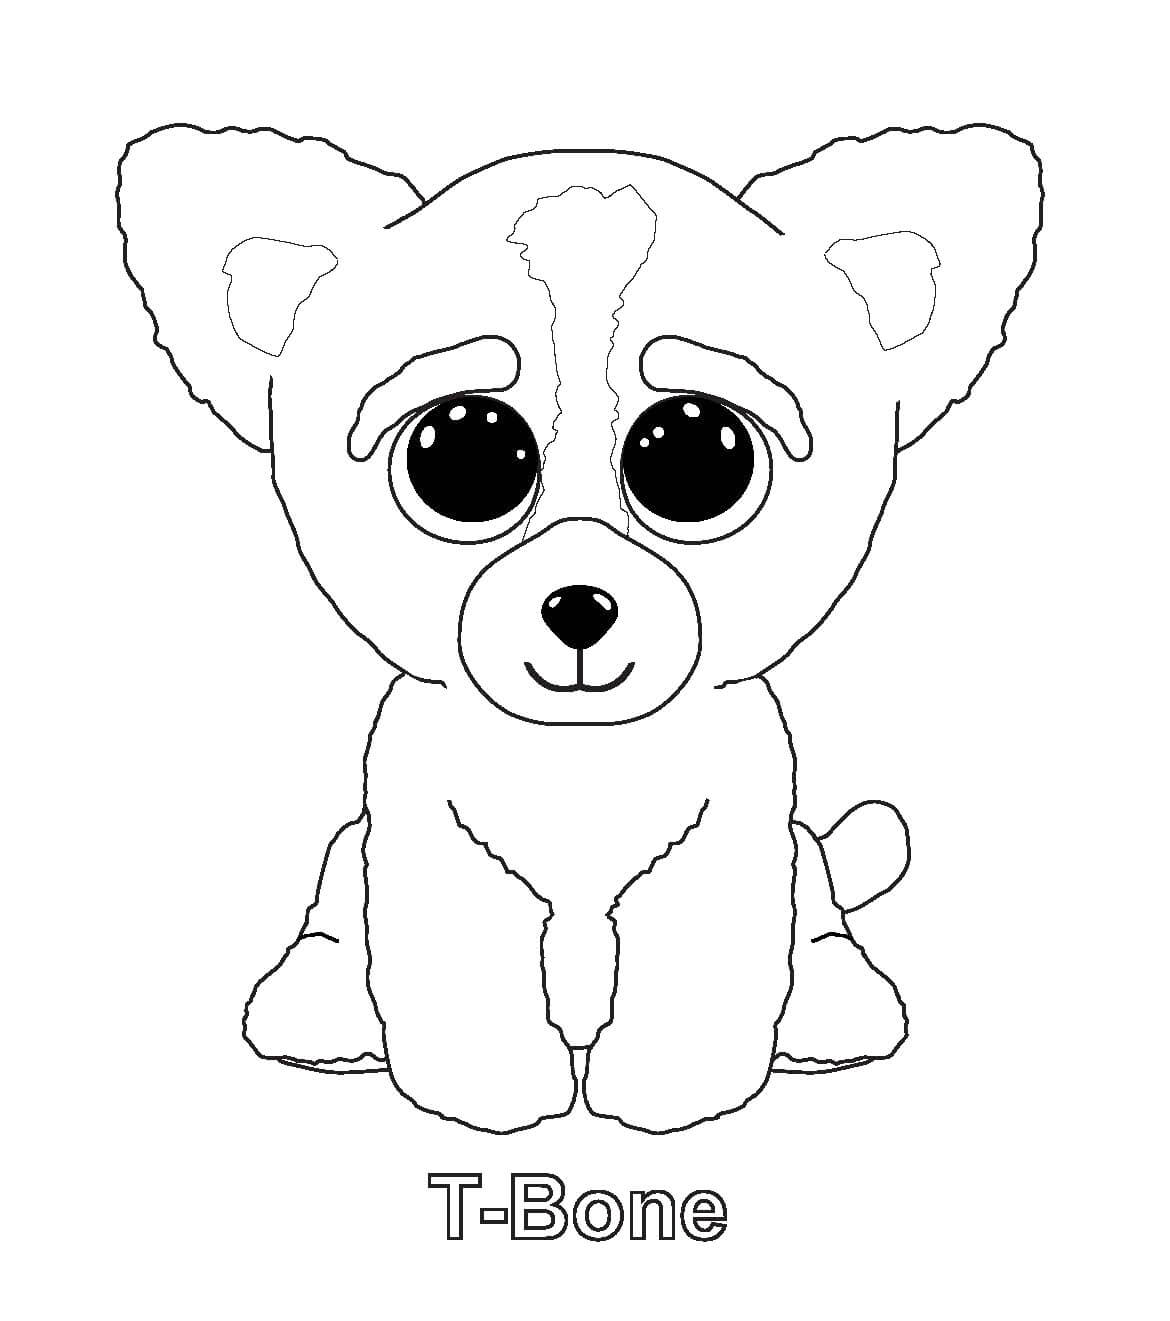 Tbone Beanie Boo Coloring Pages